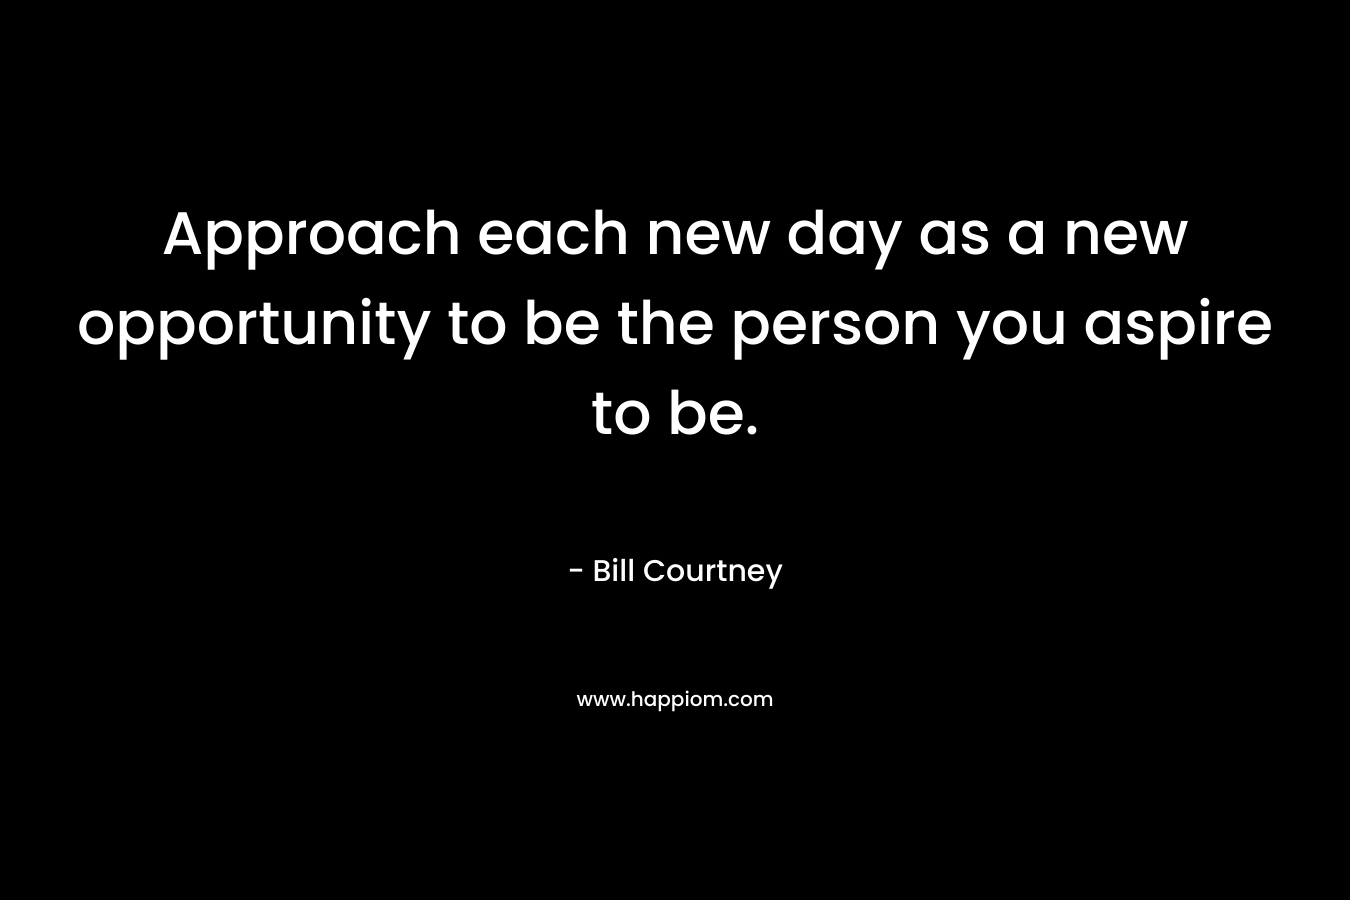 Approach each new day as a new opportunity to be the person you aspire to be. – Bill Courtney